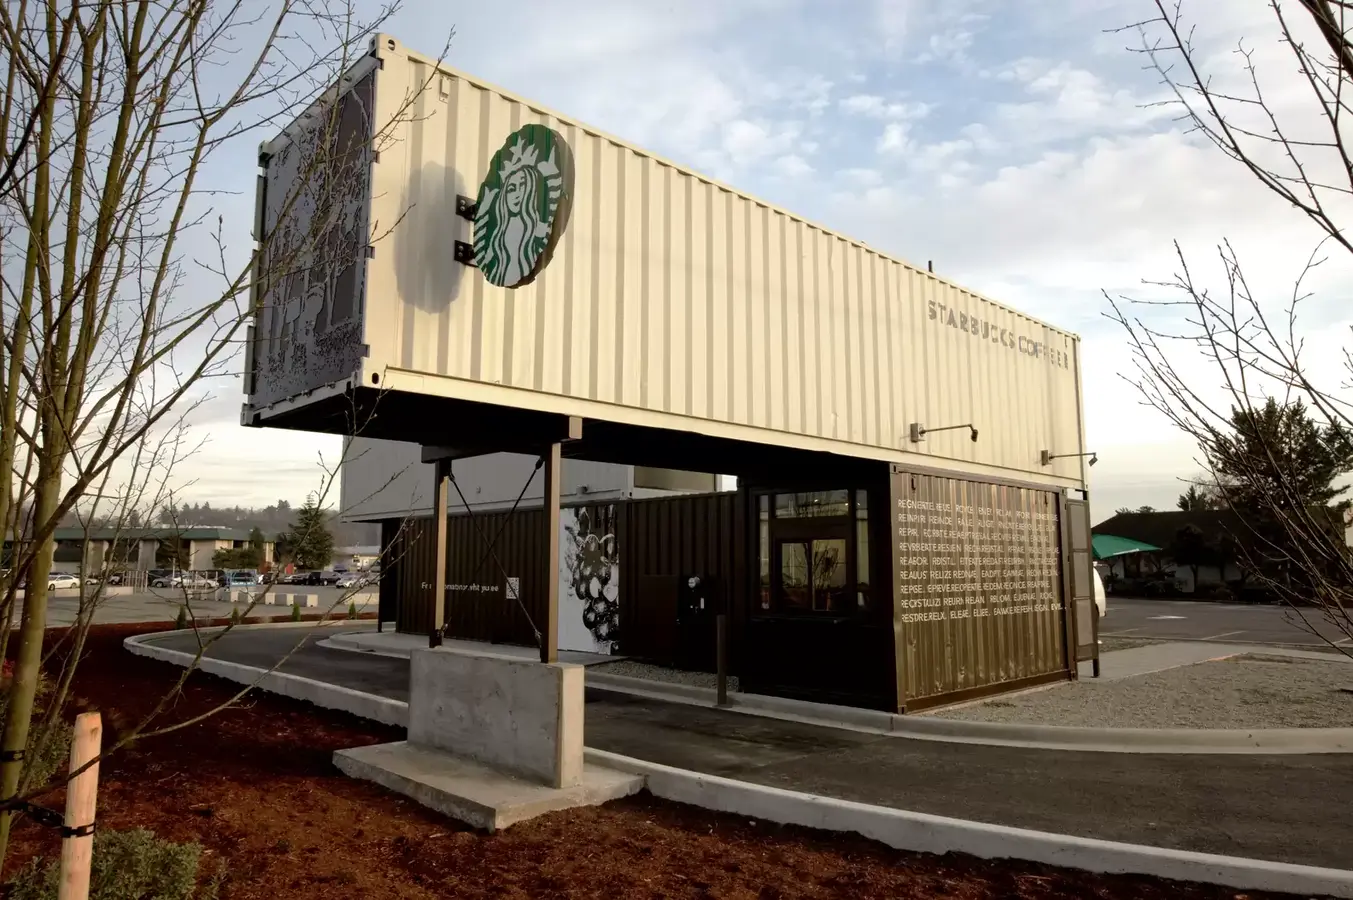 Weirdest Starbucks Stores In The World: In a Shipping Container